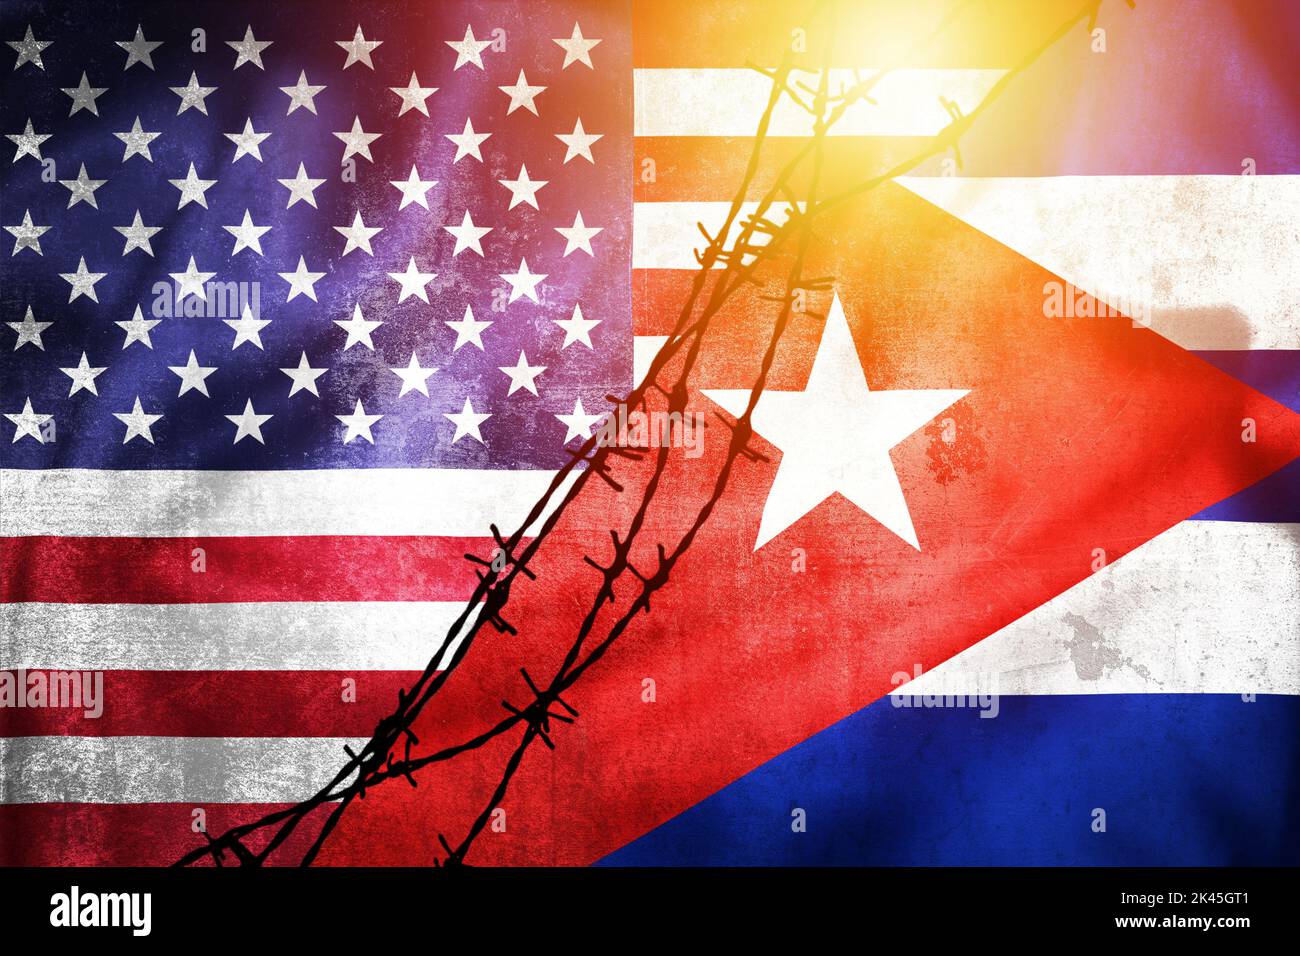 Grunge flags of USA and Cuba divided by barb wire sun haze illustration, concept of tense relations between USA and Cuba Stock Photo